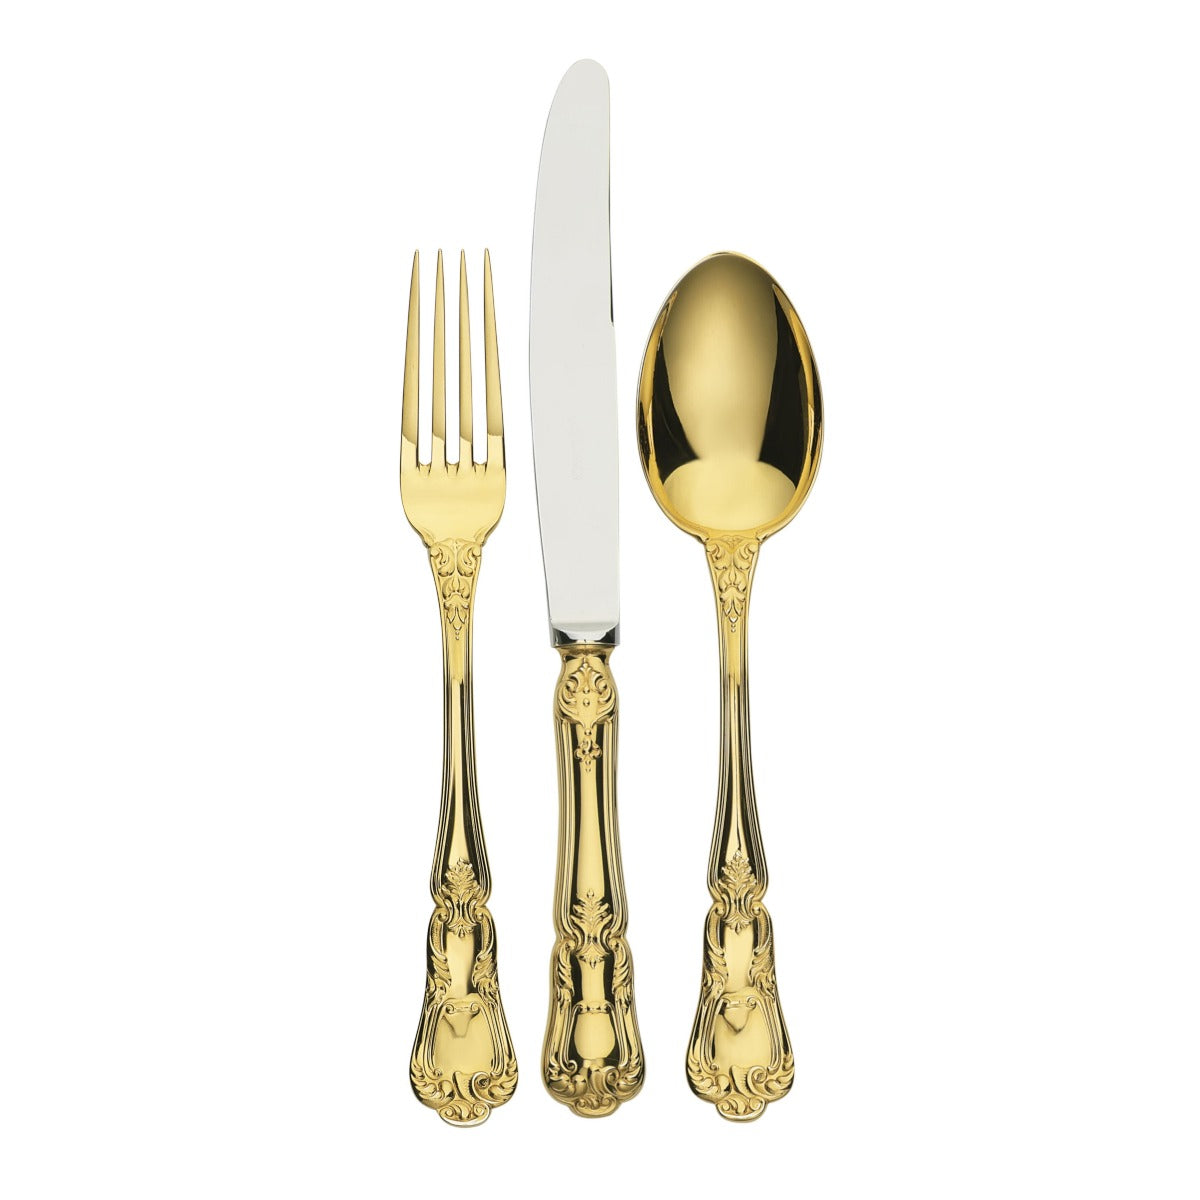 Dinner knife, fork and spoon